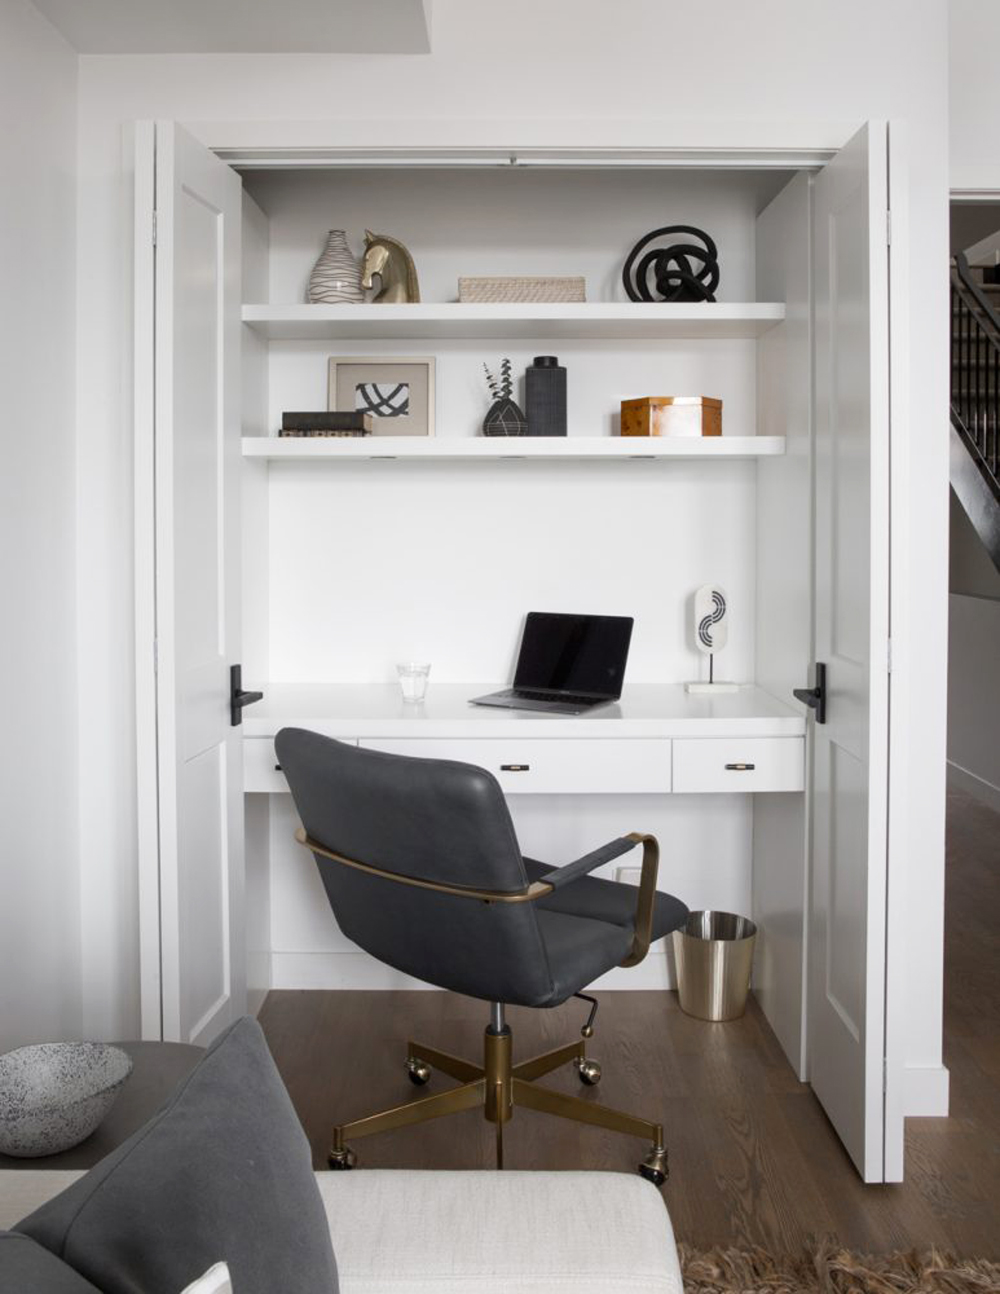 A simple white office space inside of a tiny bedroom closet with shelving and wheeled office chair